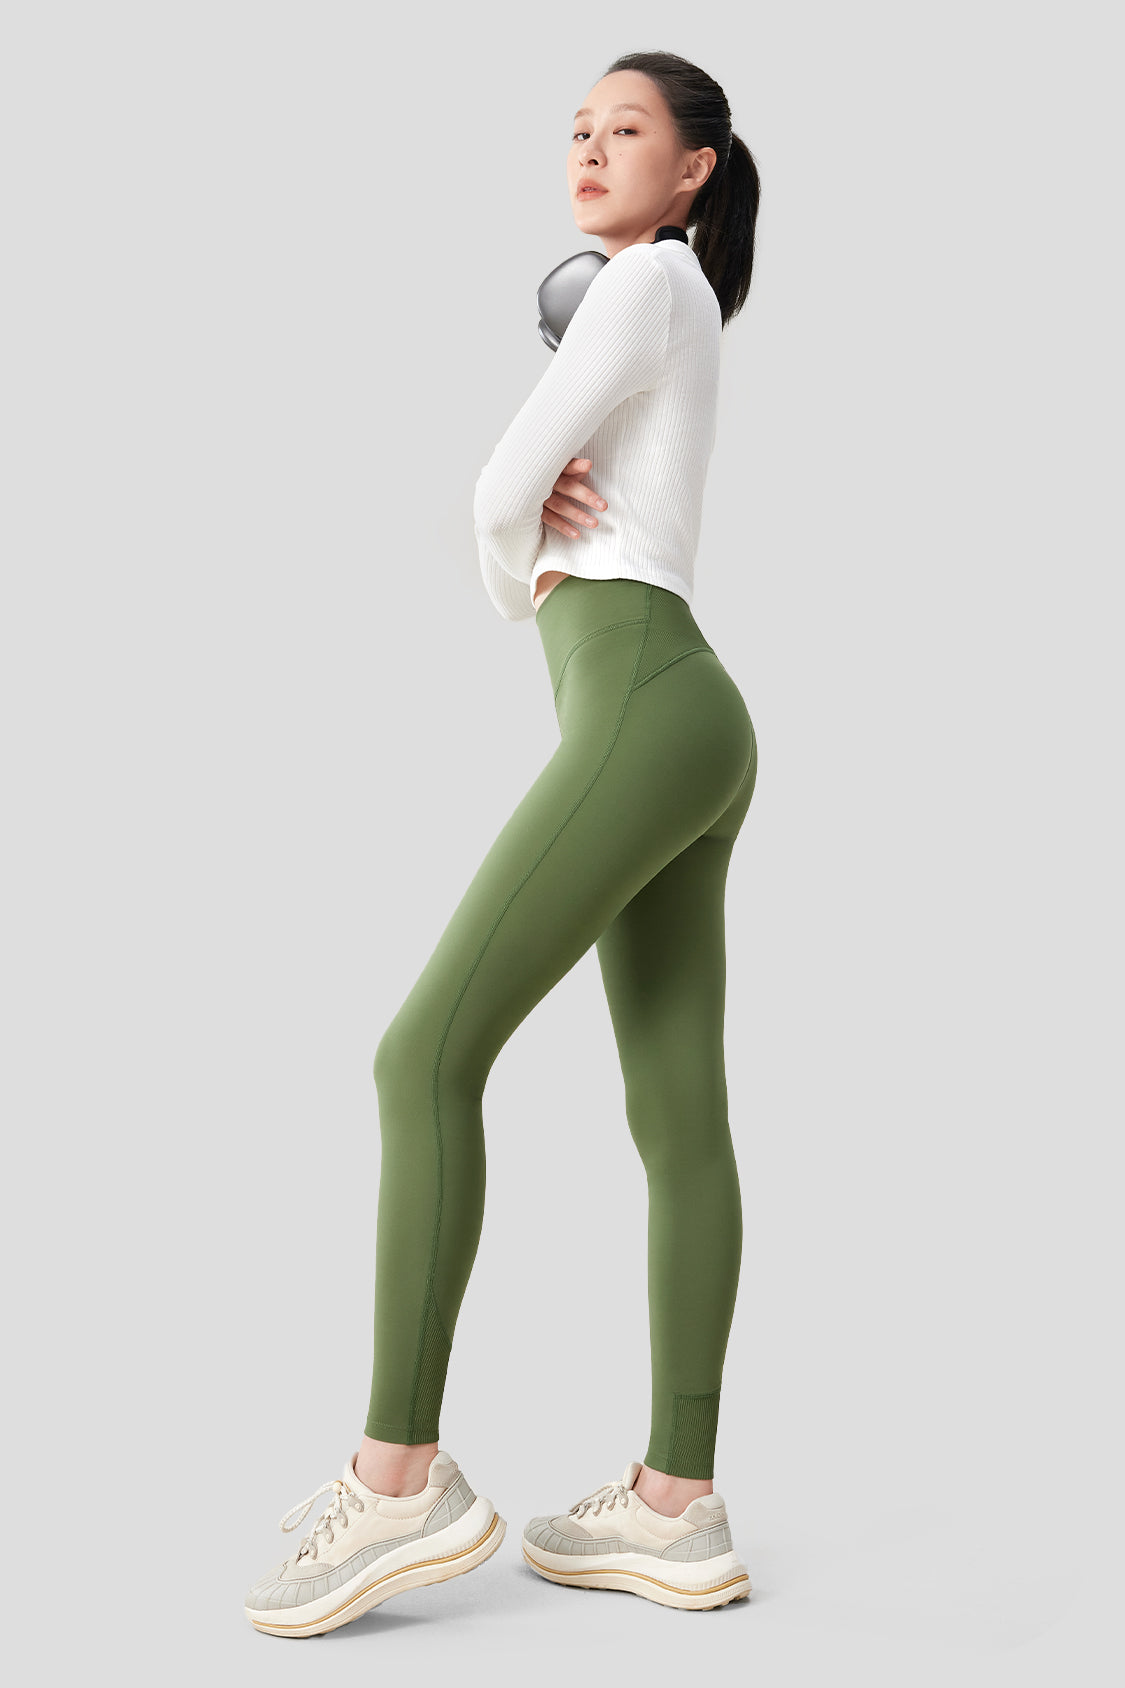 Womens Ethnic Thermal Inner Wear Tops And Pants Warm And Comfortable  Thermal Underwear Women From Beguilingy, $13.95